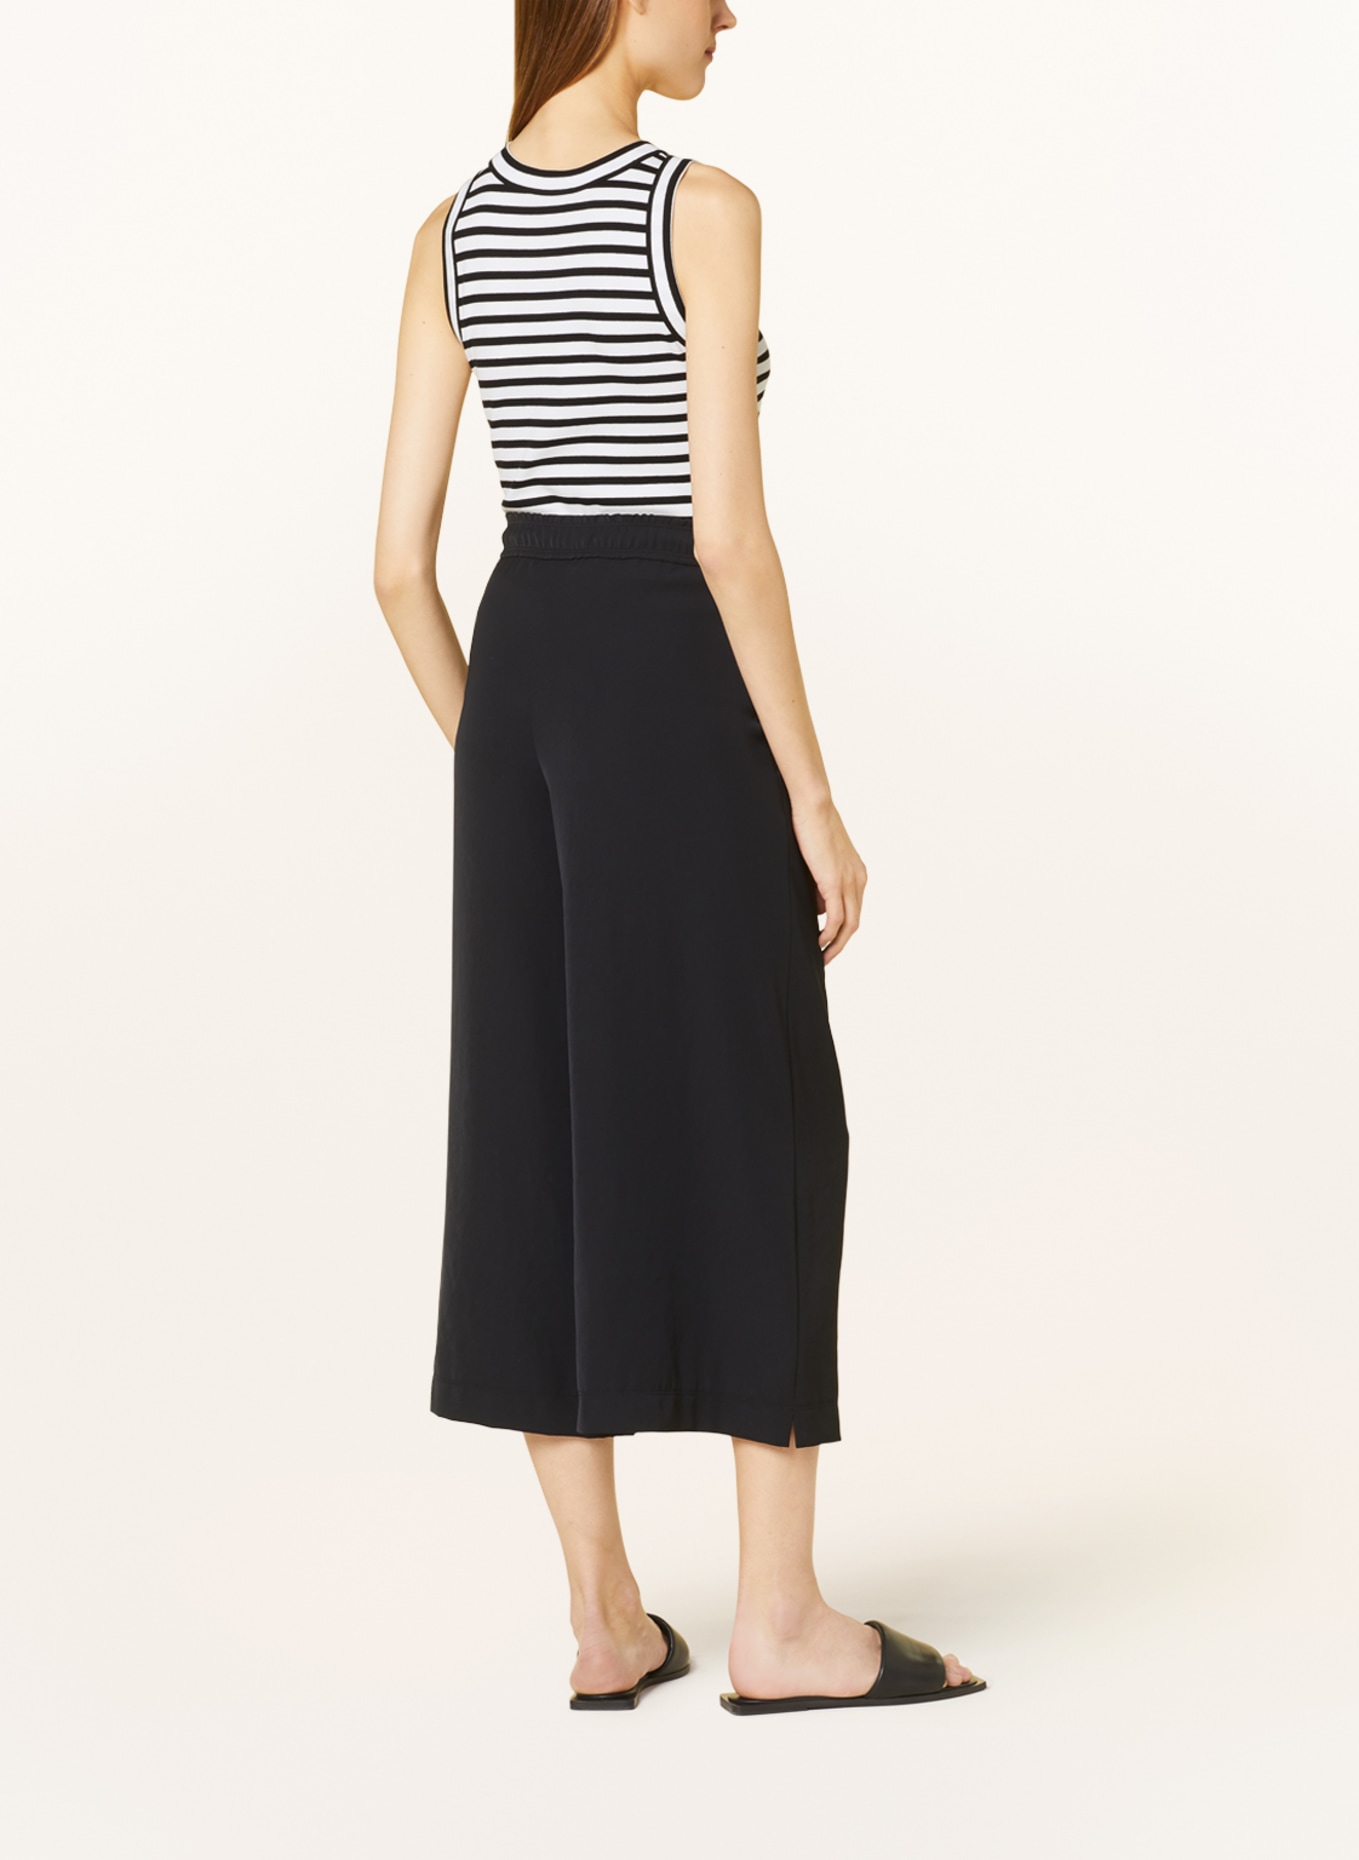 MARC CAIN Top, Color: 910 black and white (Image 3)